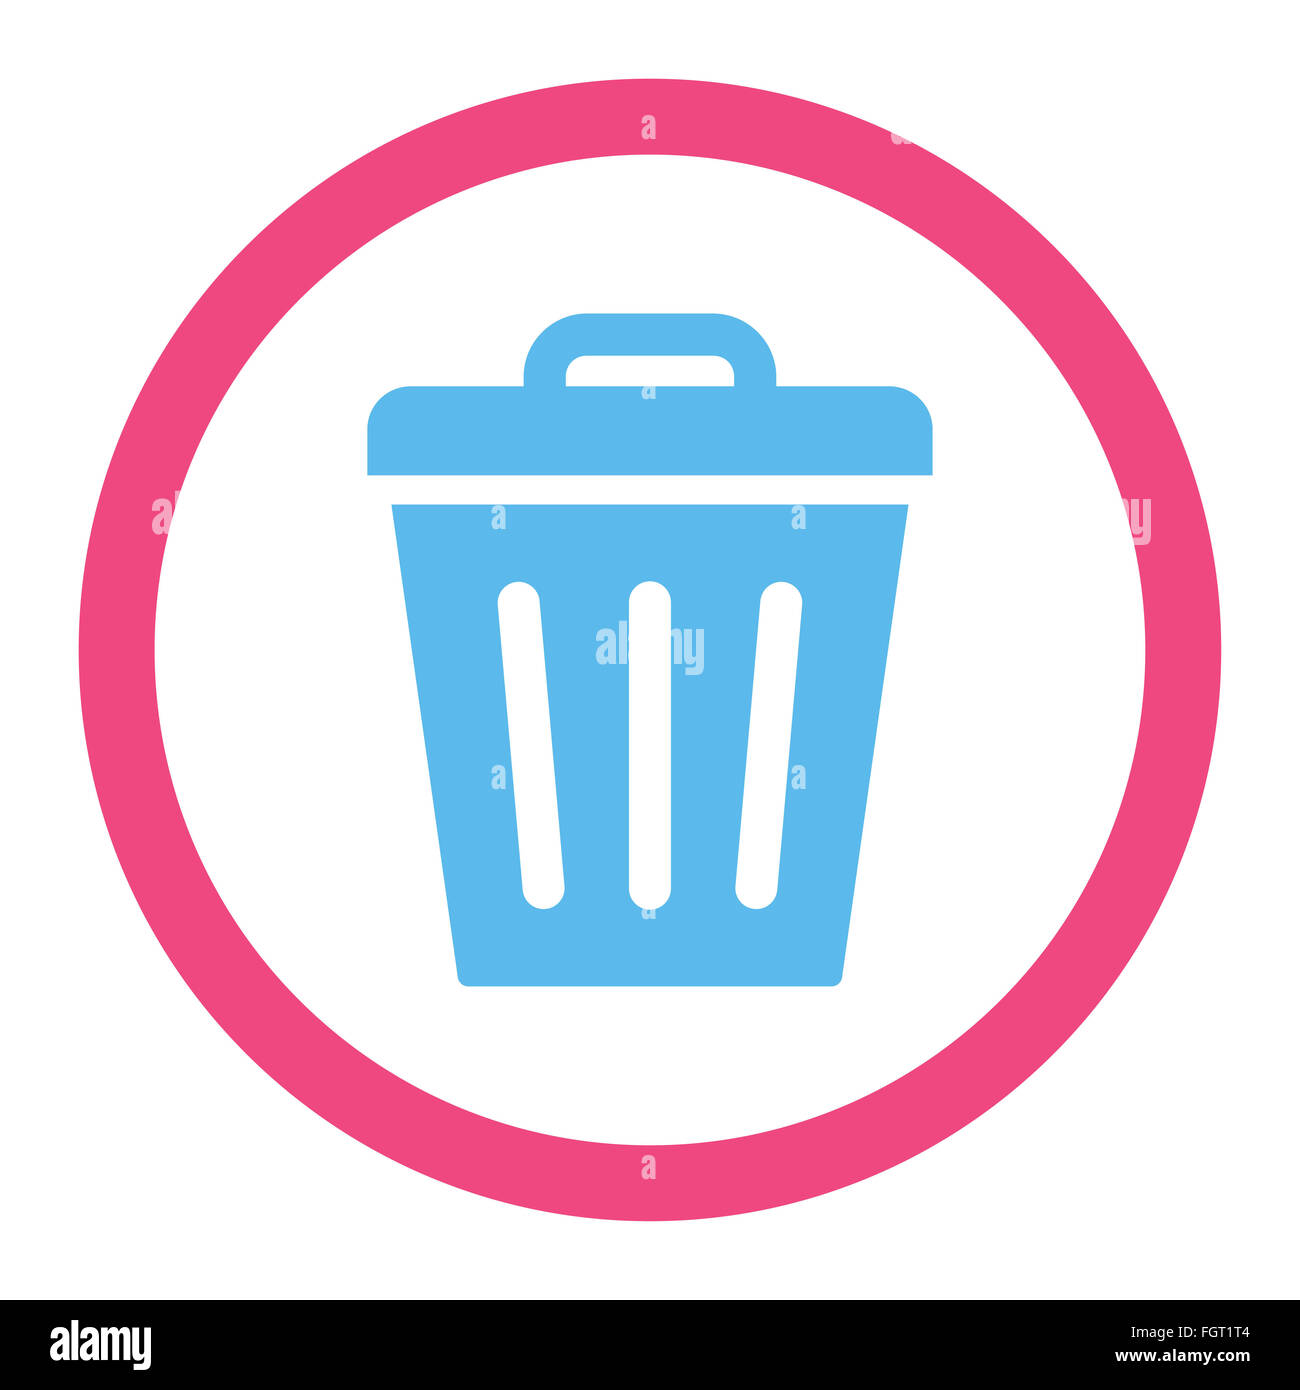 Trash Can flat pink and blue colors rounded vector icon Stock Photo